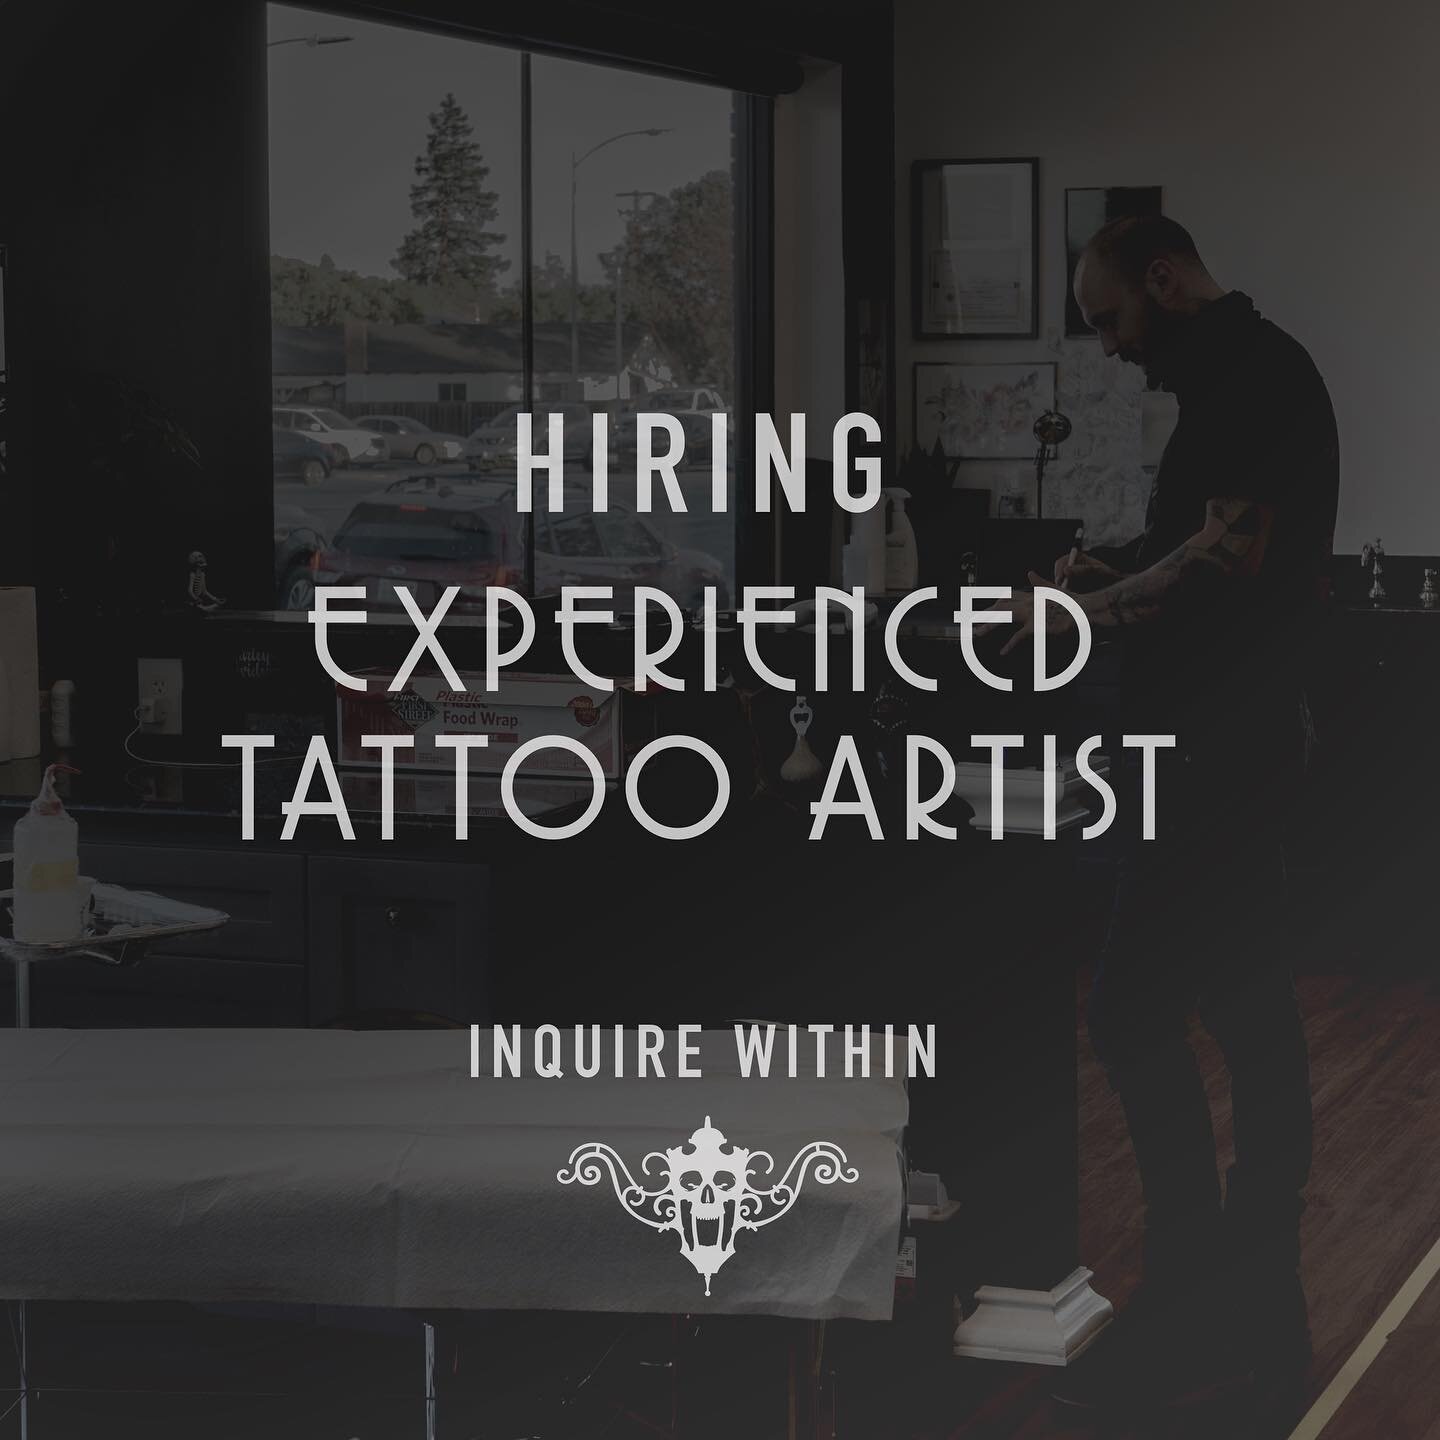 Accepting applications for a full-time, experienced tattoo artist. Contact @chase_weggeland_art or @sextontattoos if interested.